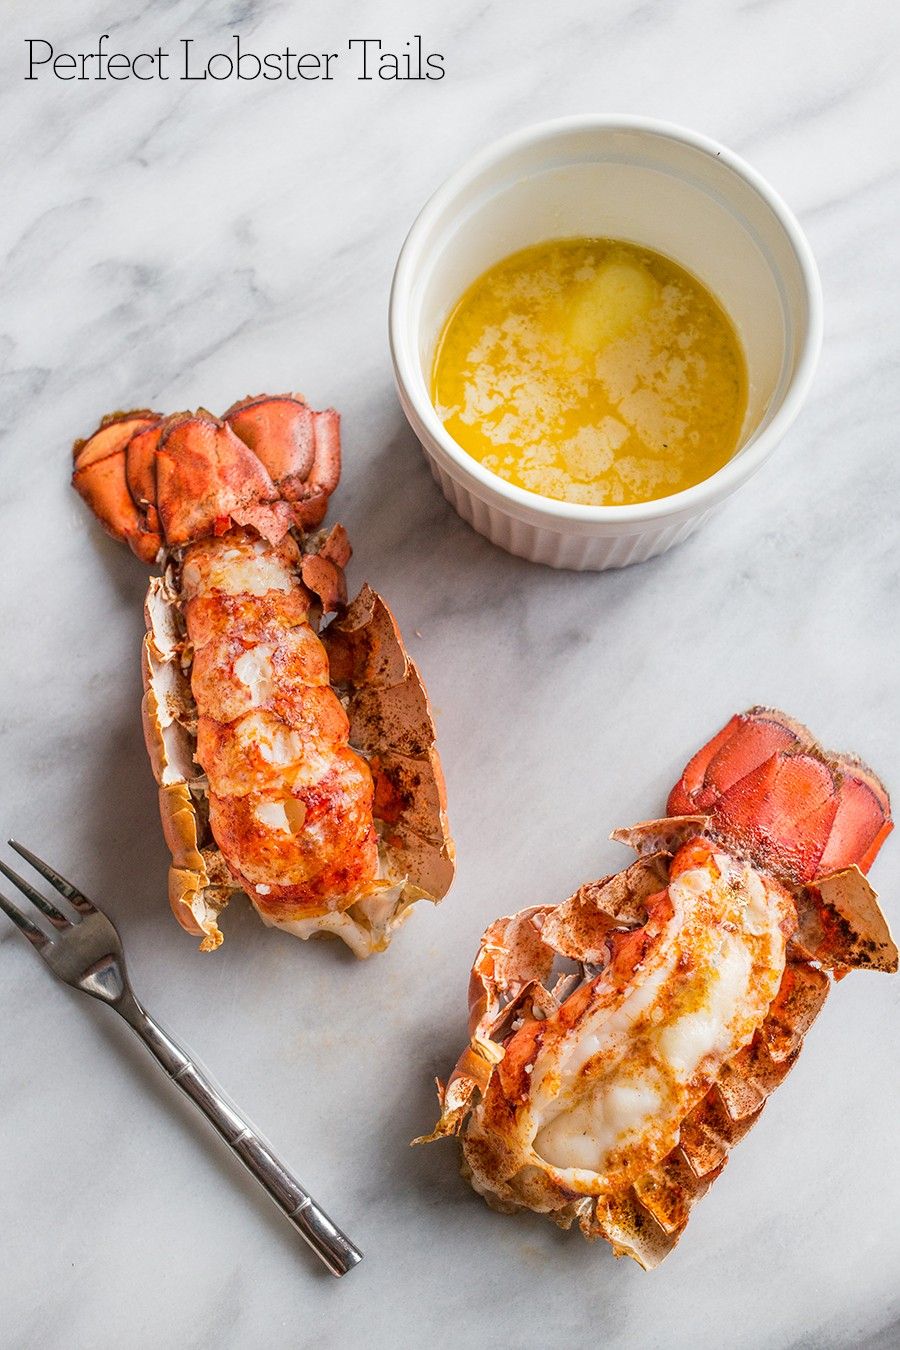 The-perfect-way-to-cook-lobster-tails-under-10-minutes-with-this-simple-trick-to-the-most-delicious-lobster-tails-ever-2